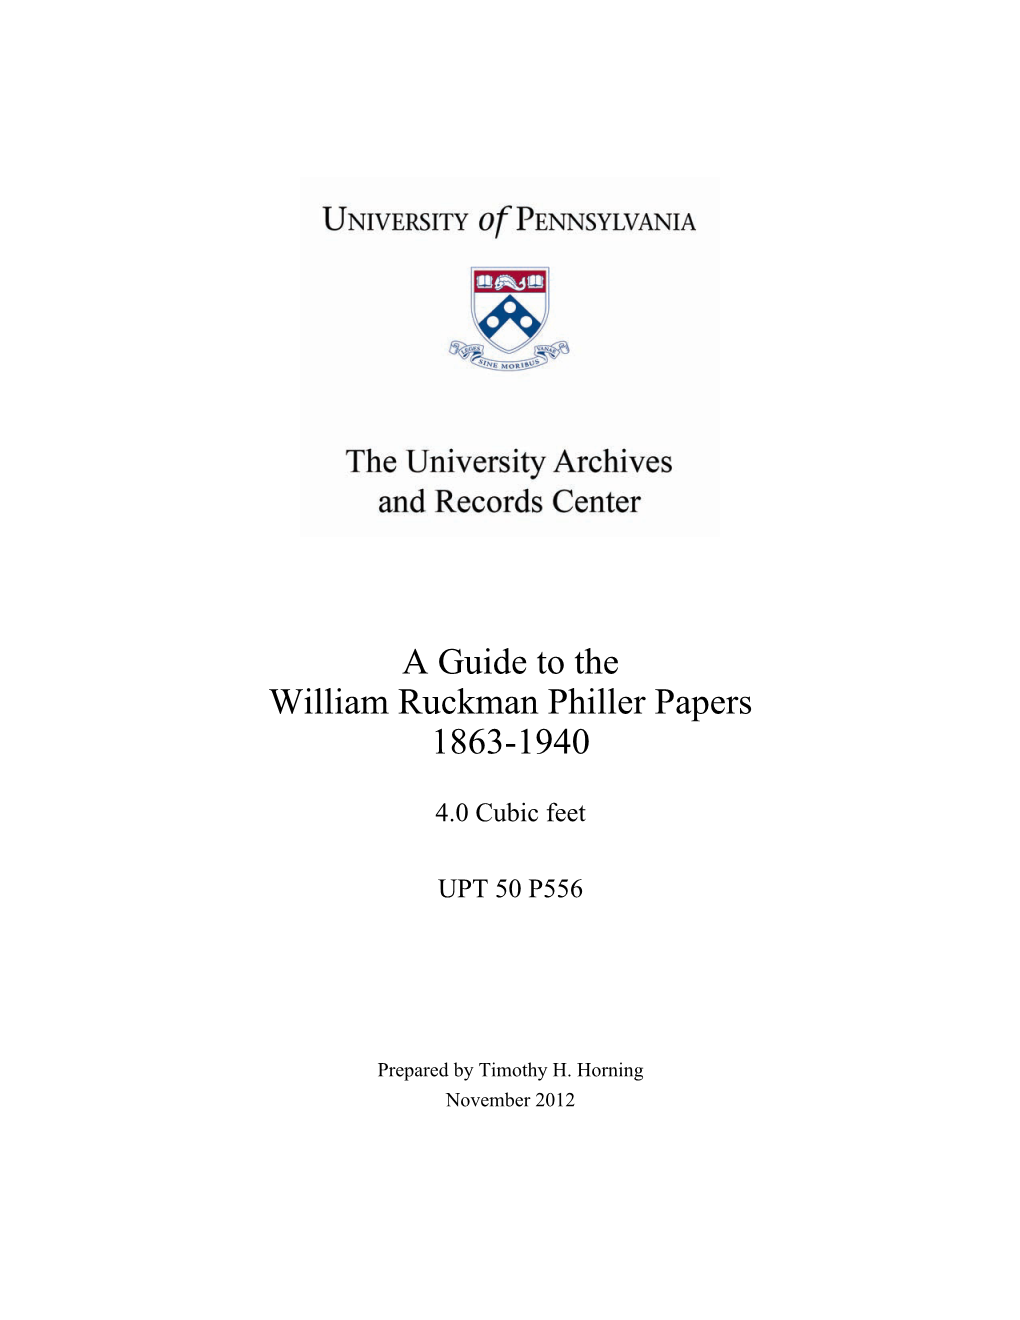 Guide, William Ruckman Philler Papers (UPT 50